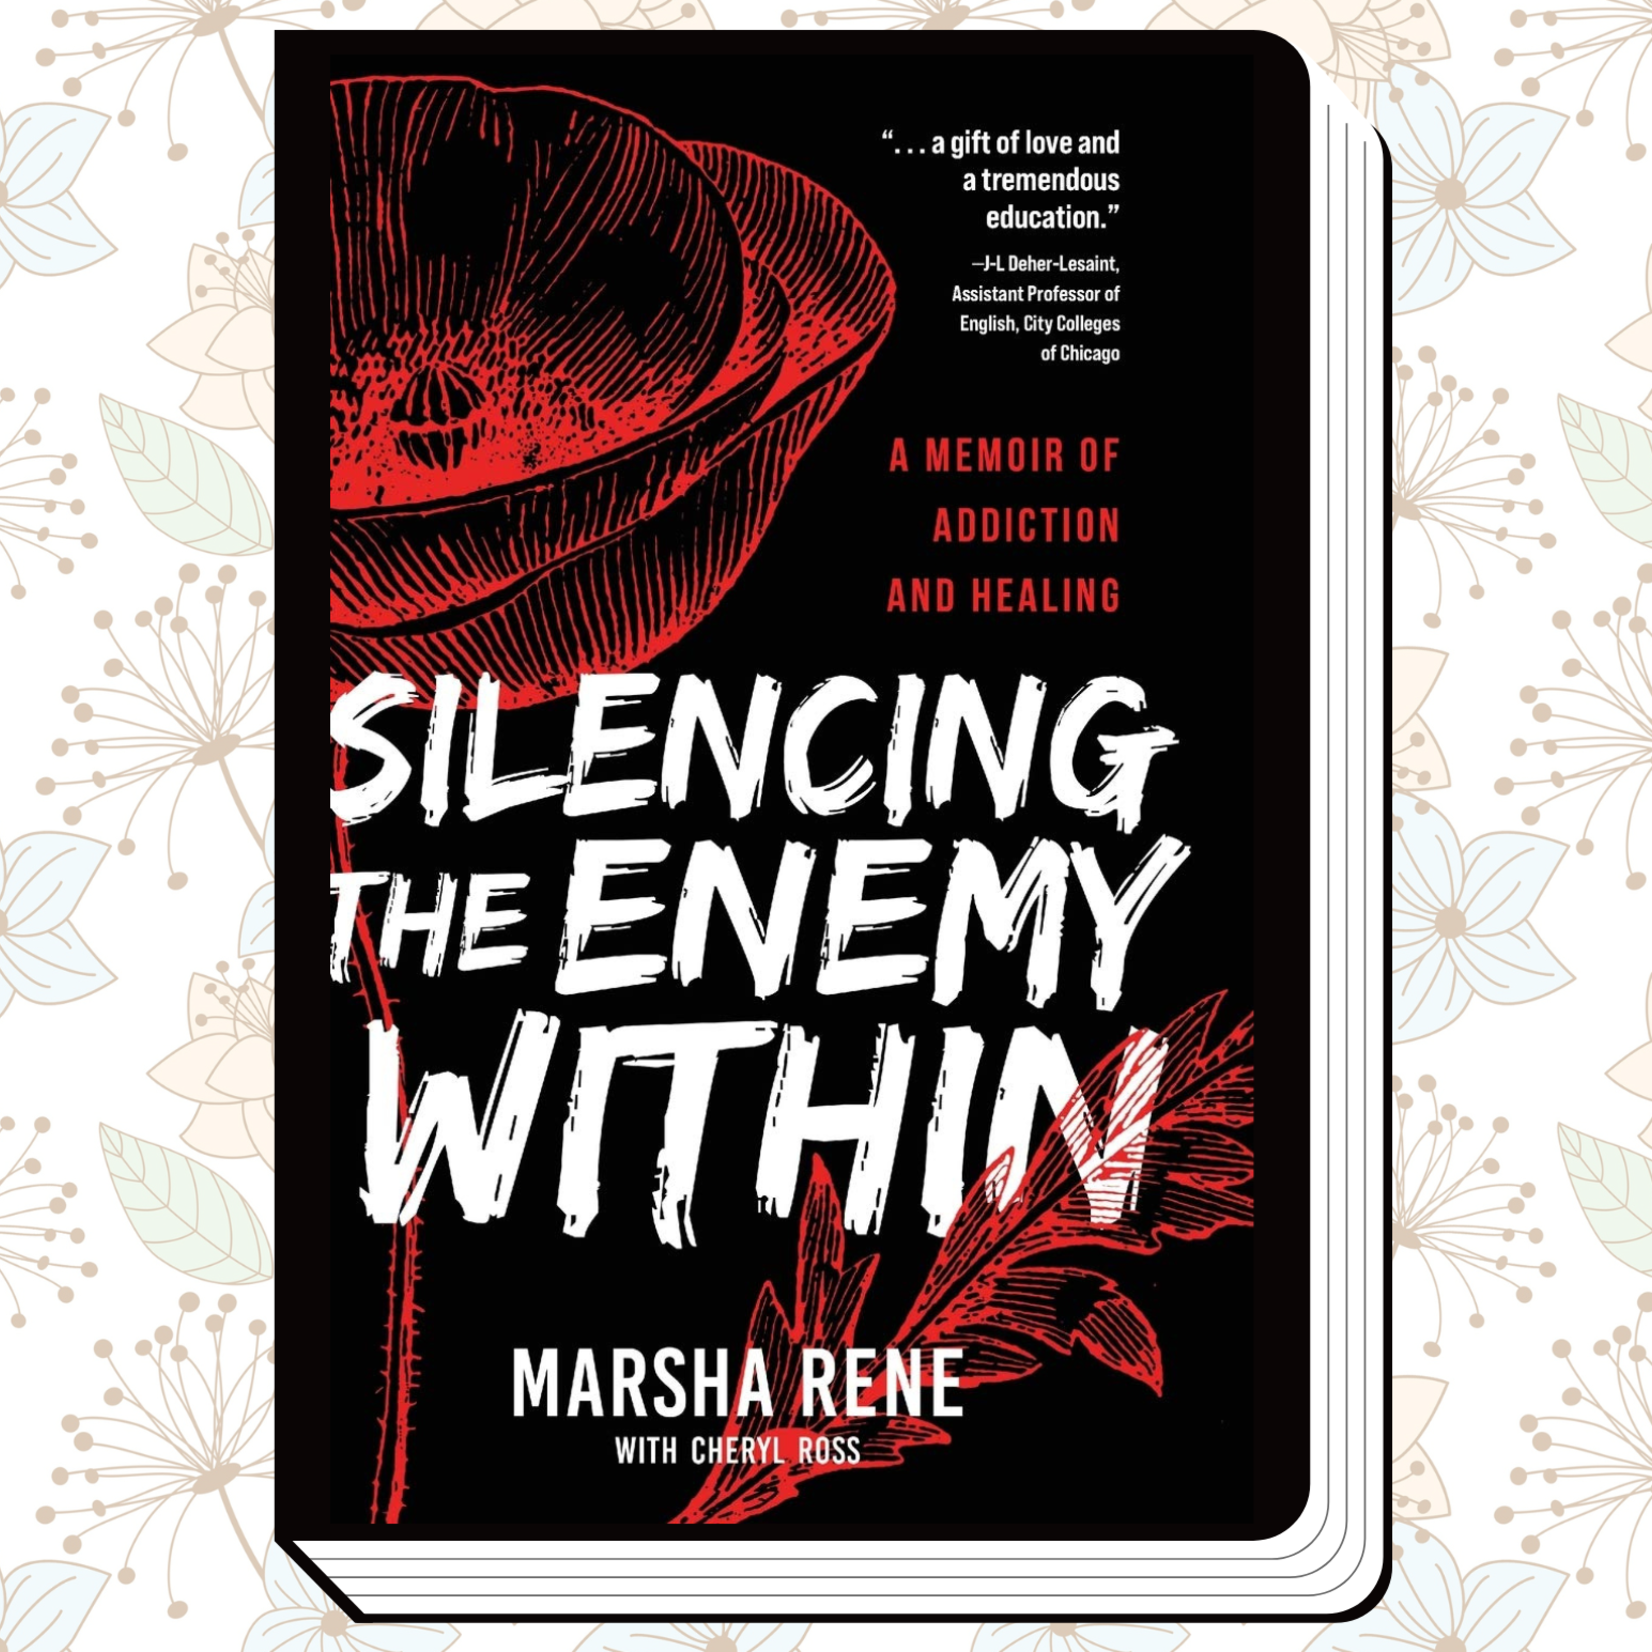 Silencing the Enemy Within (Memoir of Addiction & Healing)